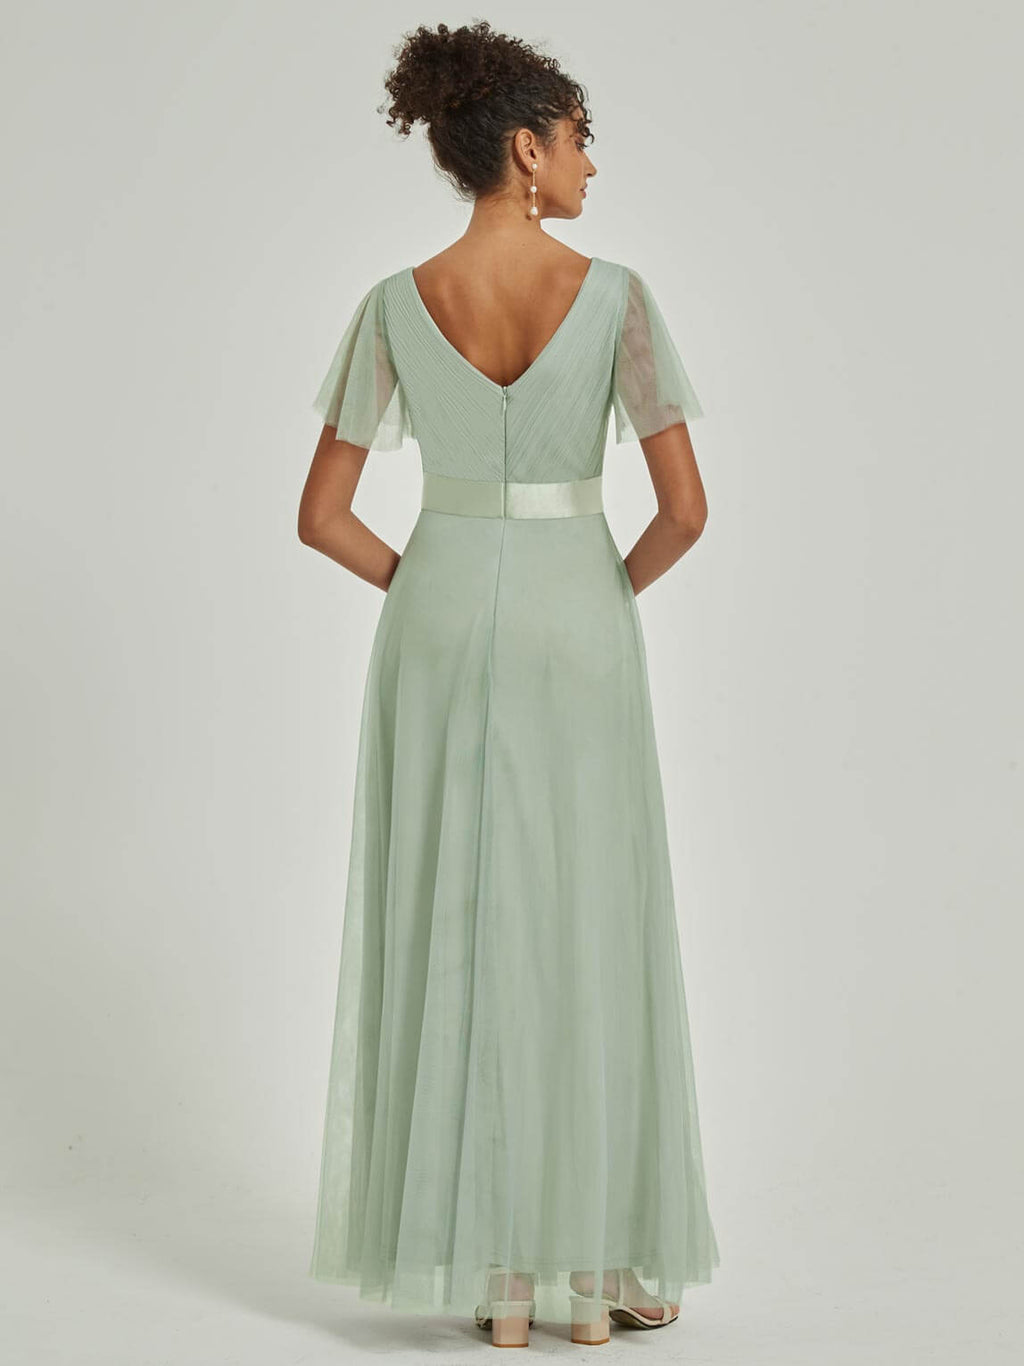 NZ Bridal Sage Green V Neck Empire Flowy Tulle Maxi bridesmaid dresses 07962ep Lucy a